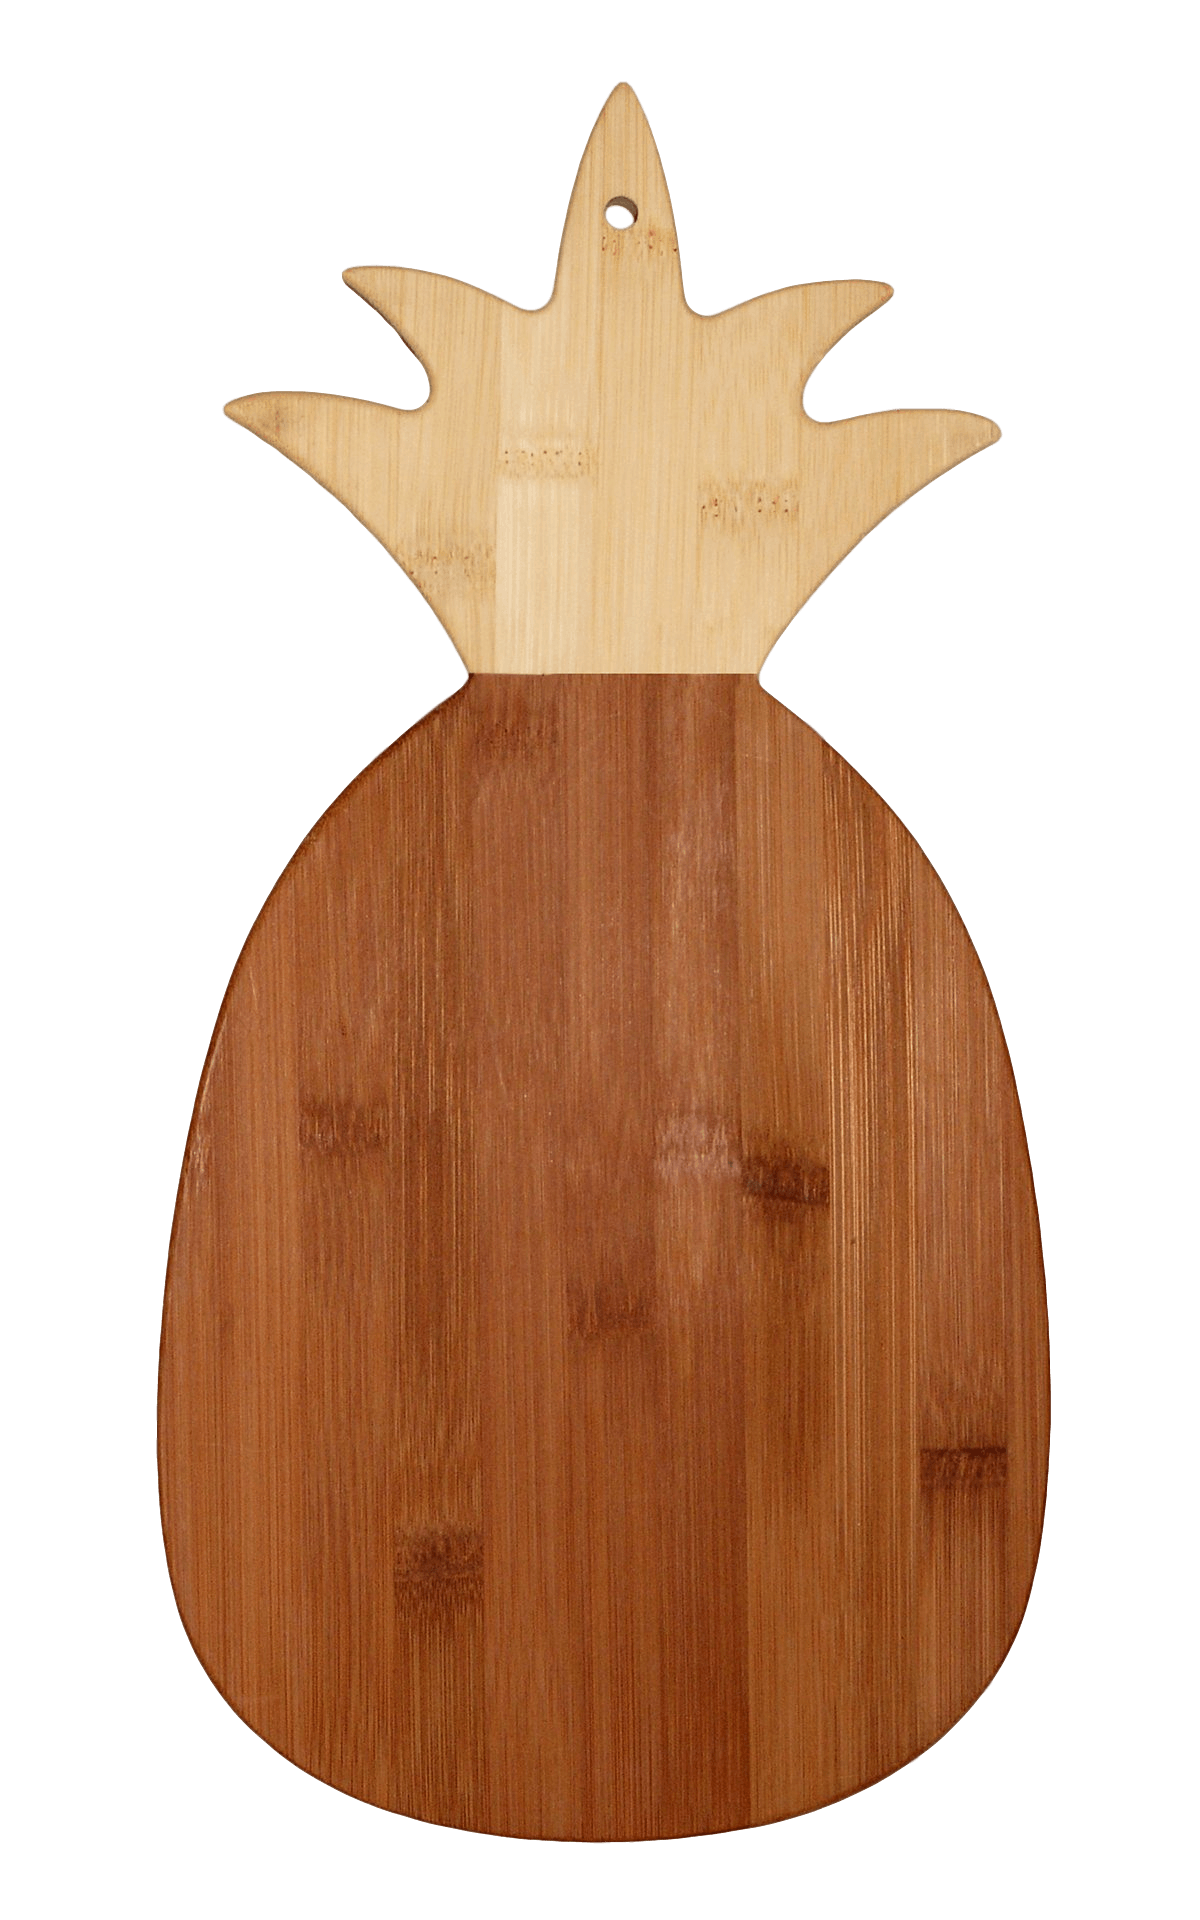 Pineapple Serving and Cutting Board - Bamboo